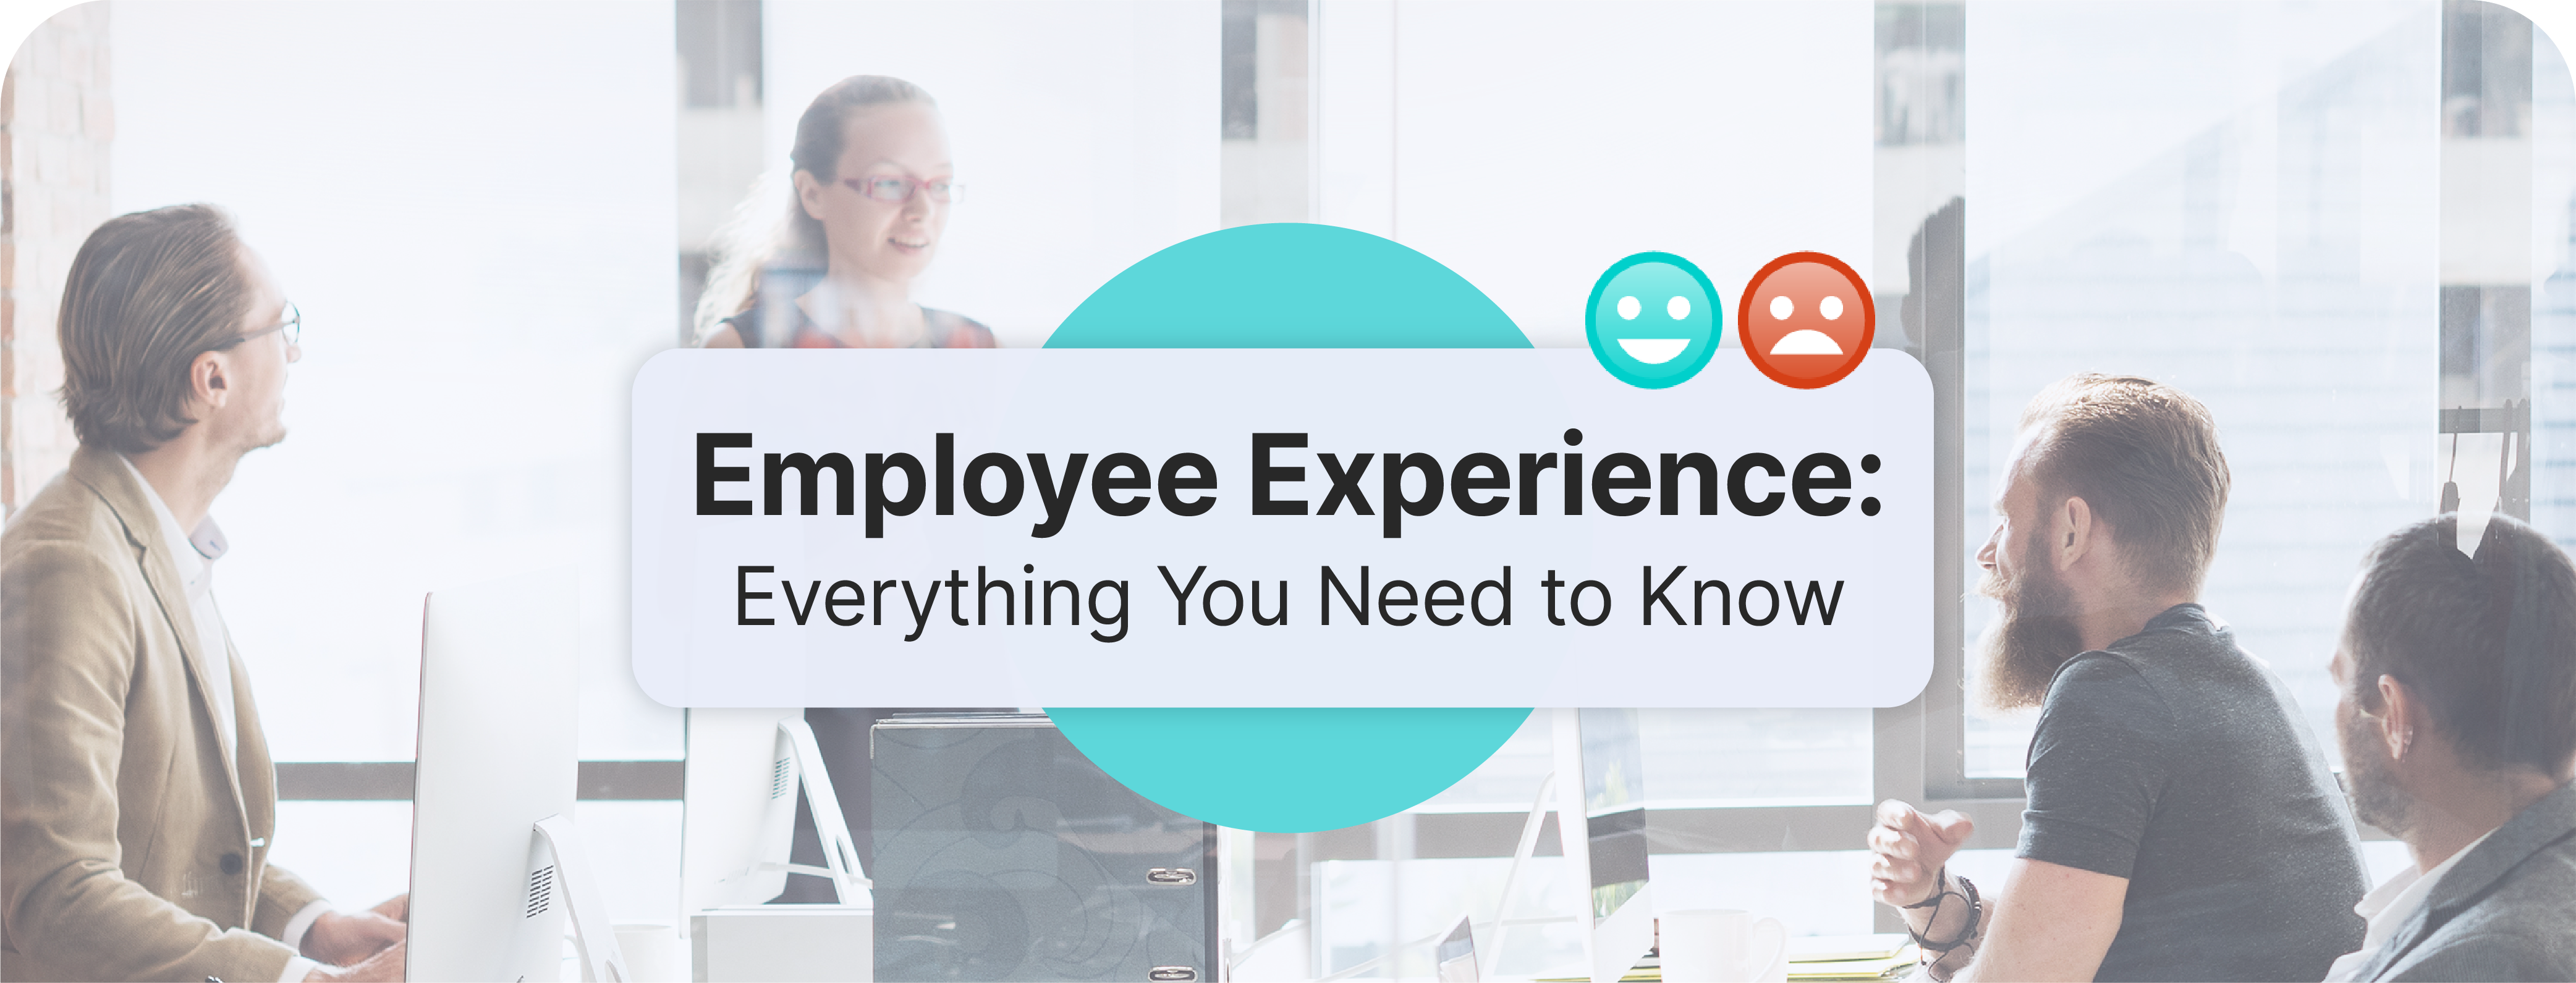 ZenHR Whitepapers - Employee Experience: Everything You Need to Know